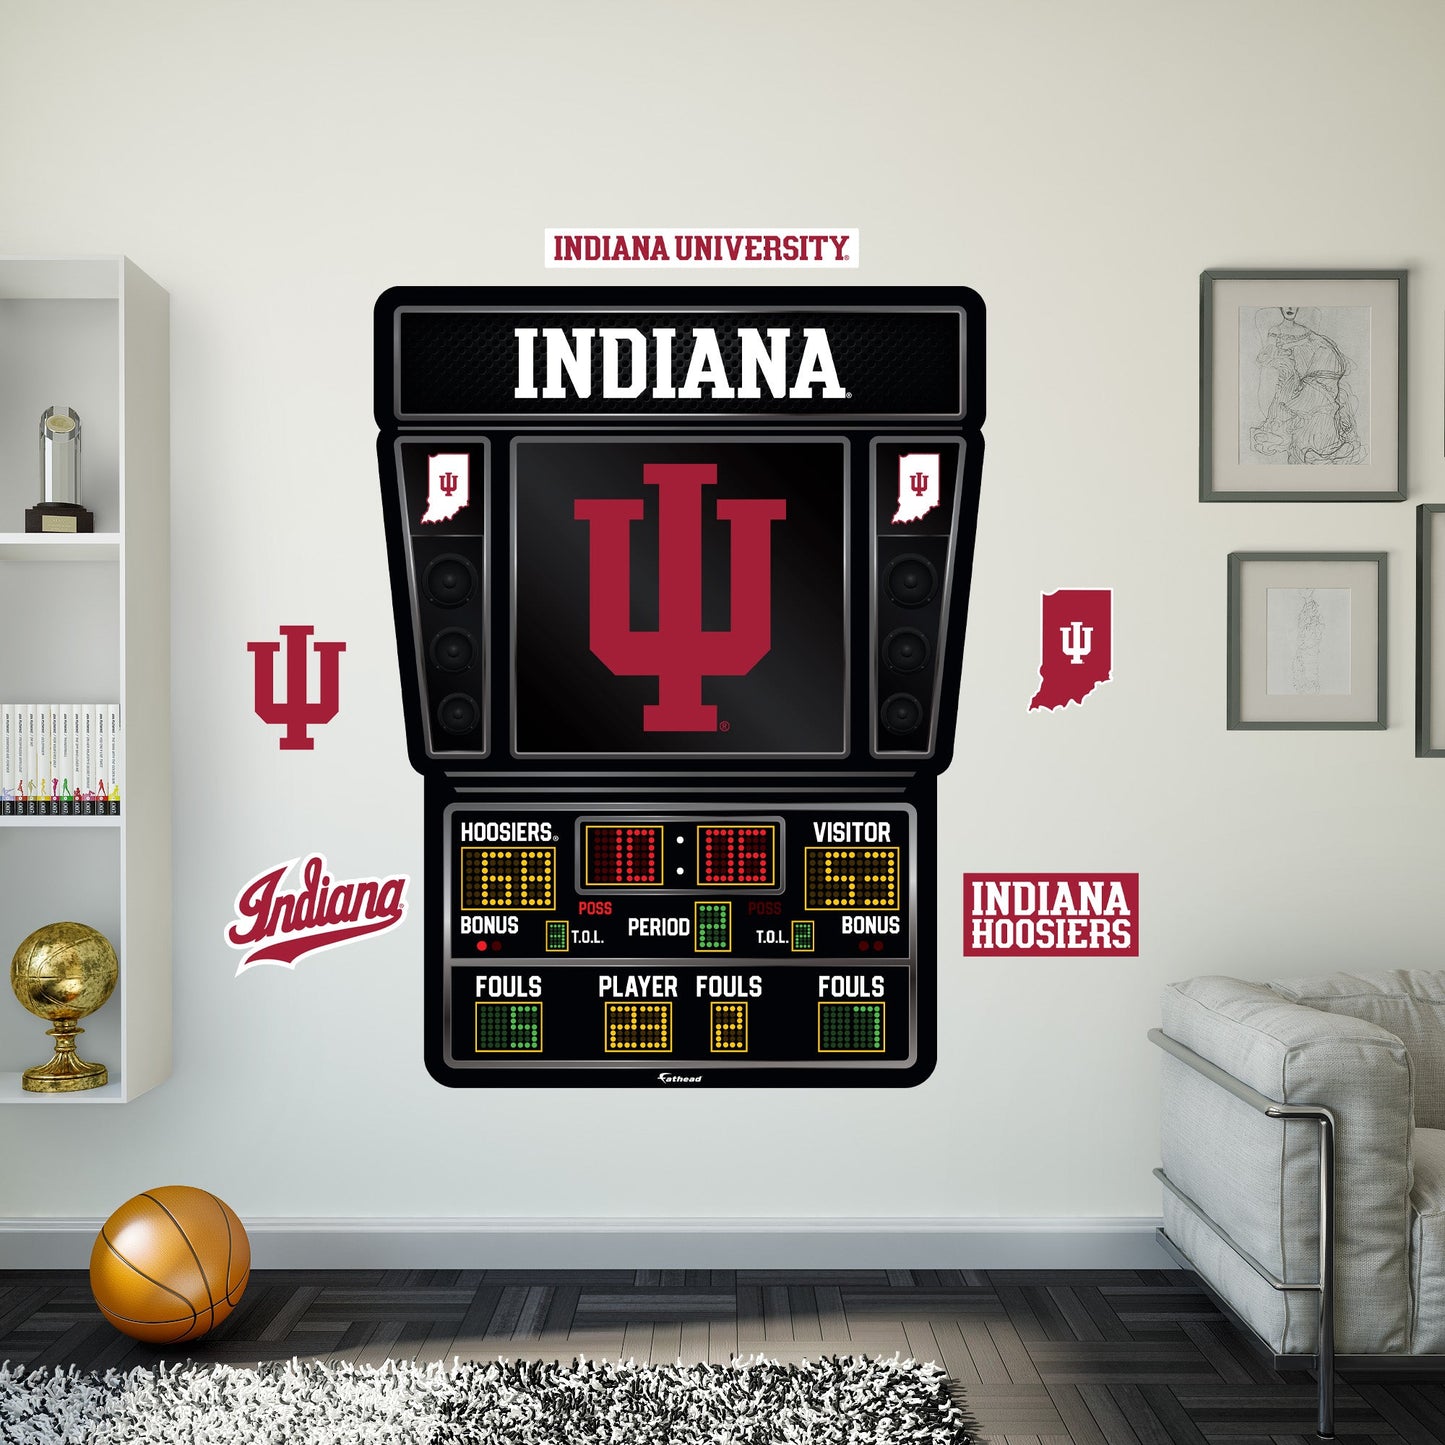 Indiana Hoosiers:   Basketball Scoreboard        - Officially Licensed NCAA Removable     Adhesive Decal